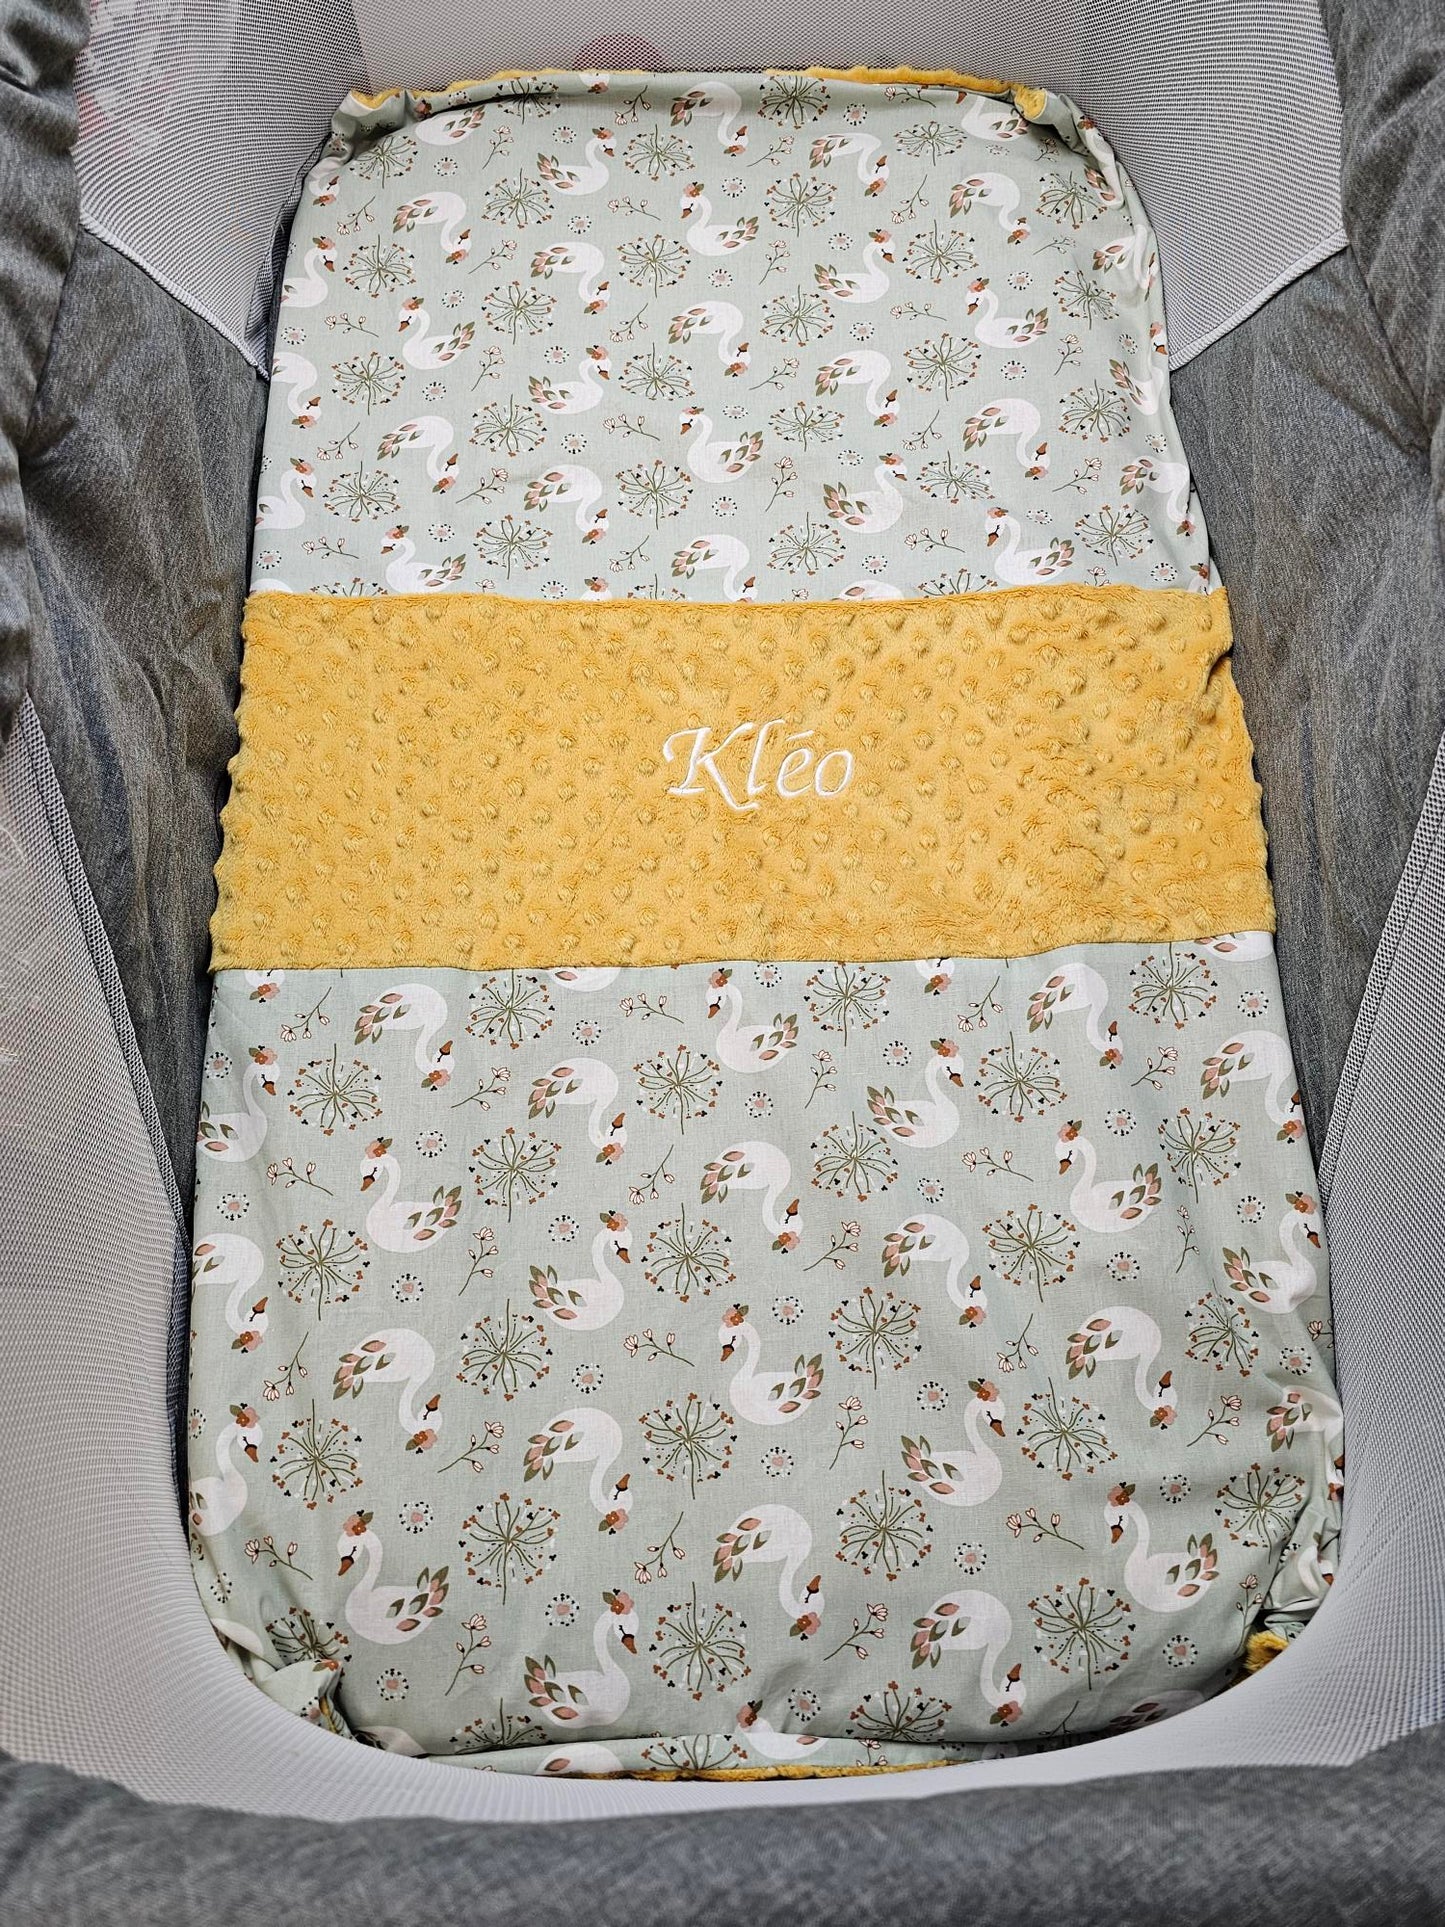 Boy Blanket | Model 2 | 70x95cm | Cotton and Minky | To personalize